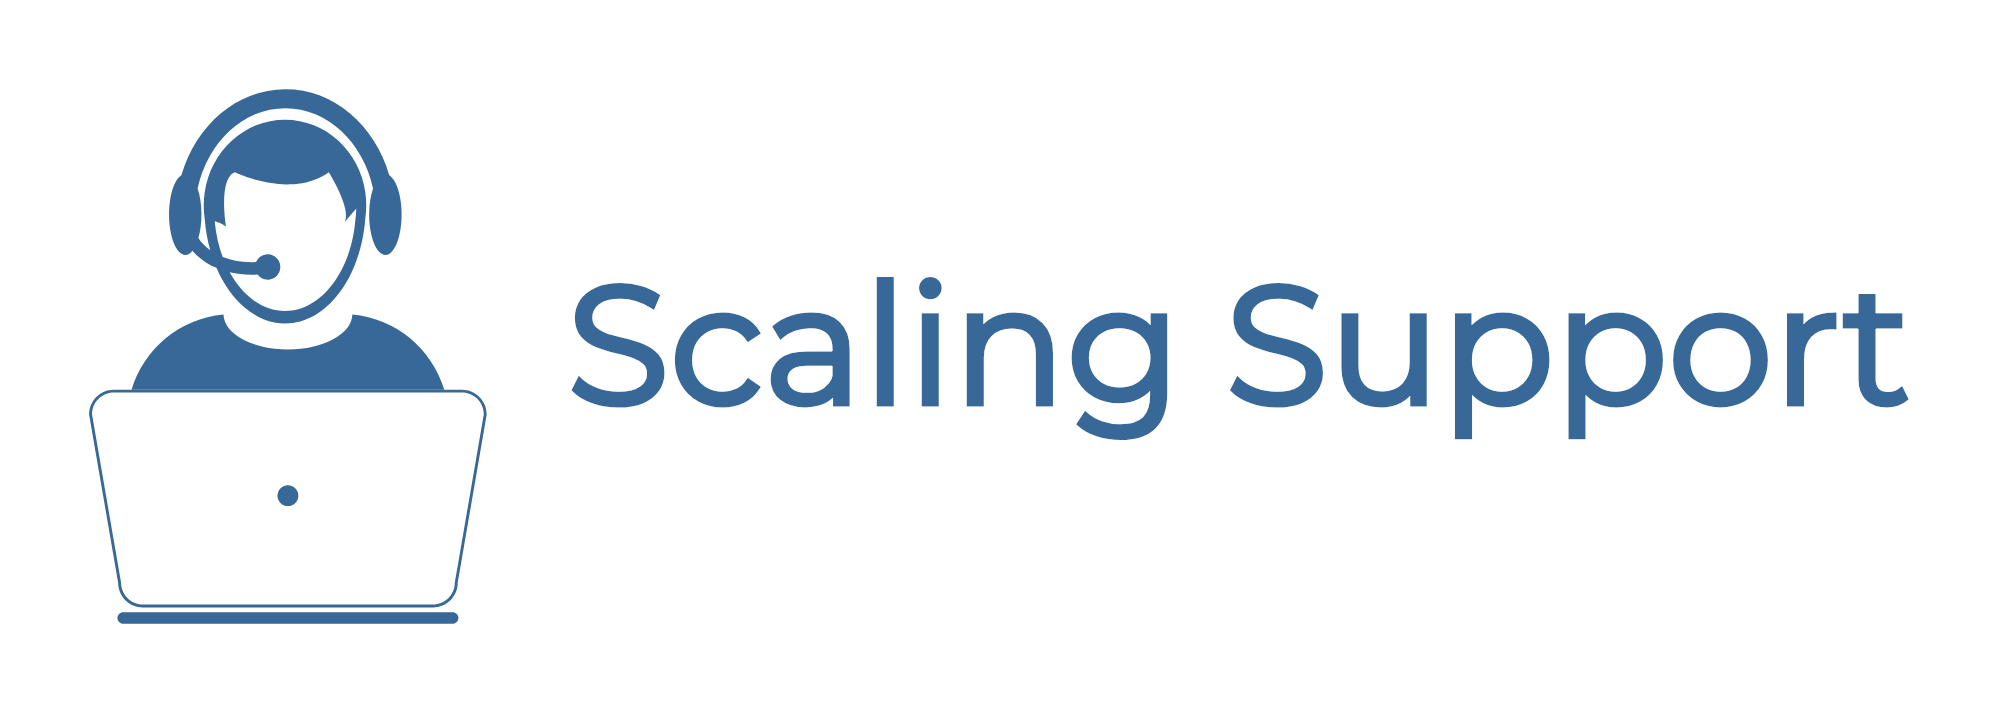 Scaling Support